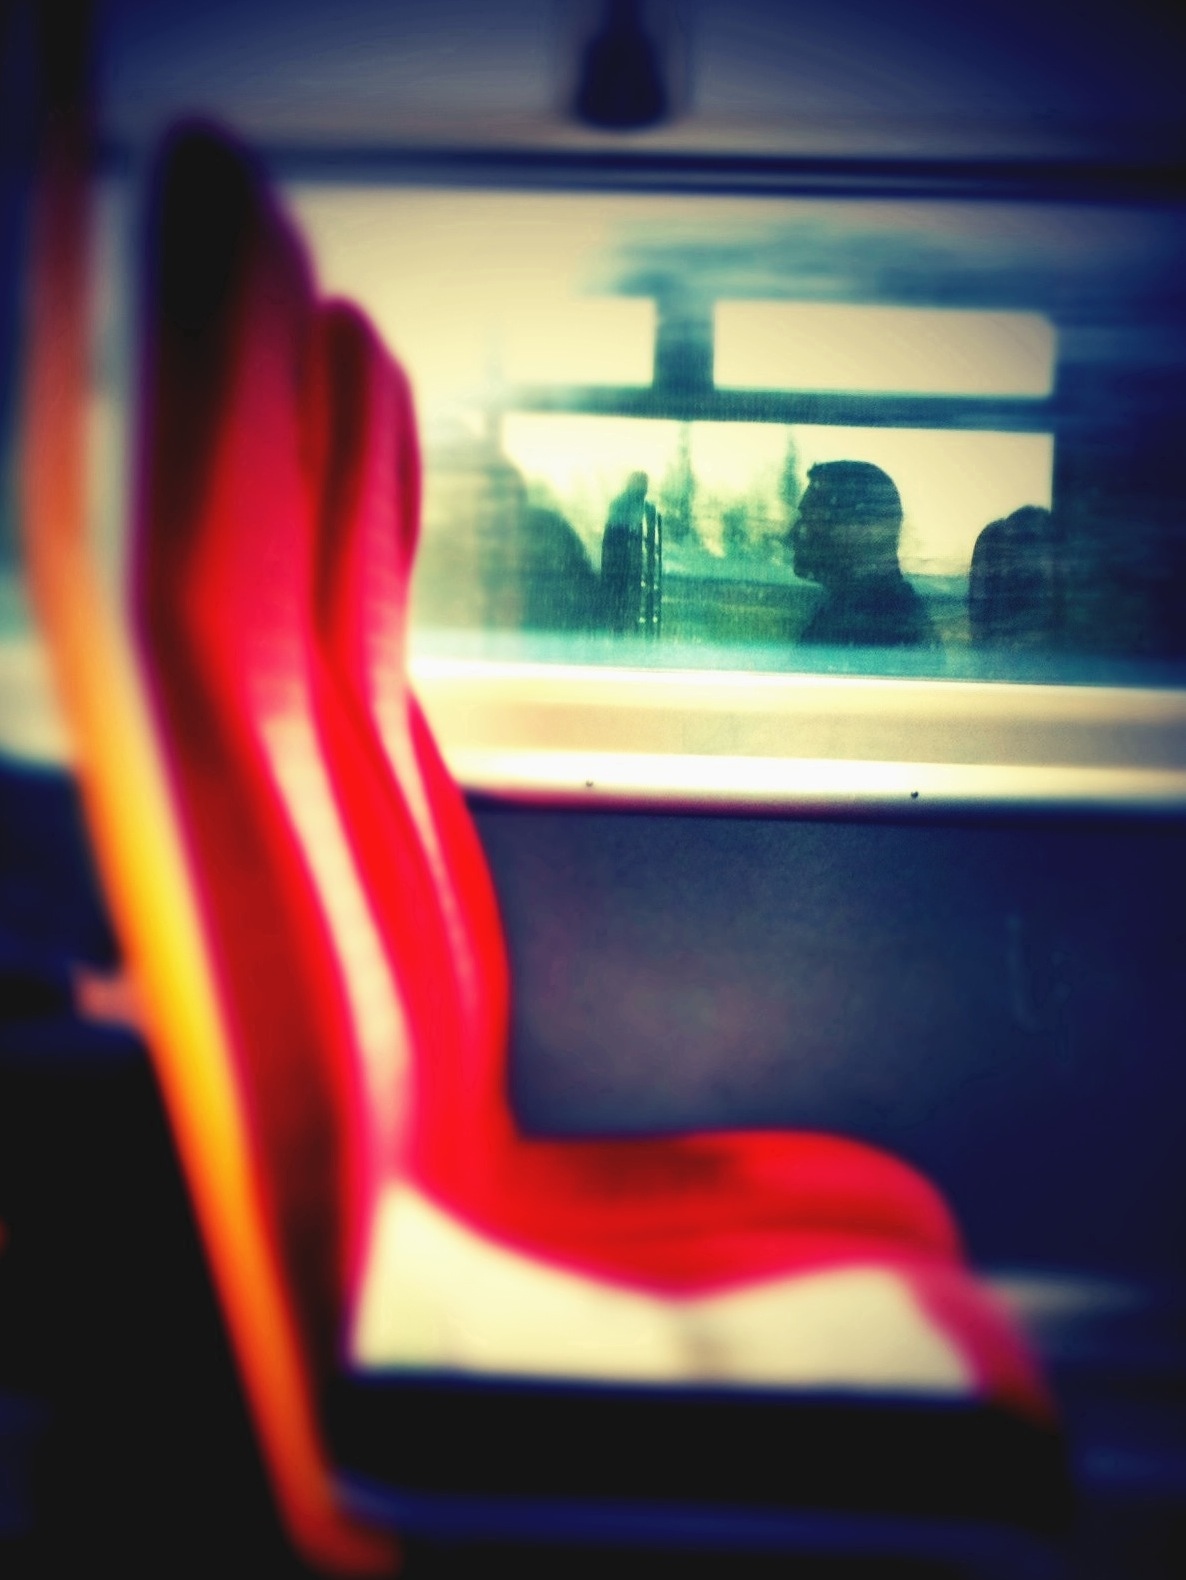 Day 69 – “On the train” #2